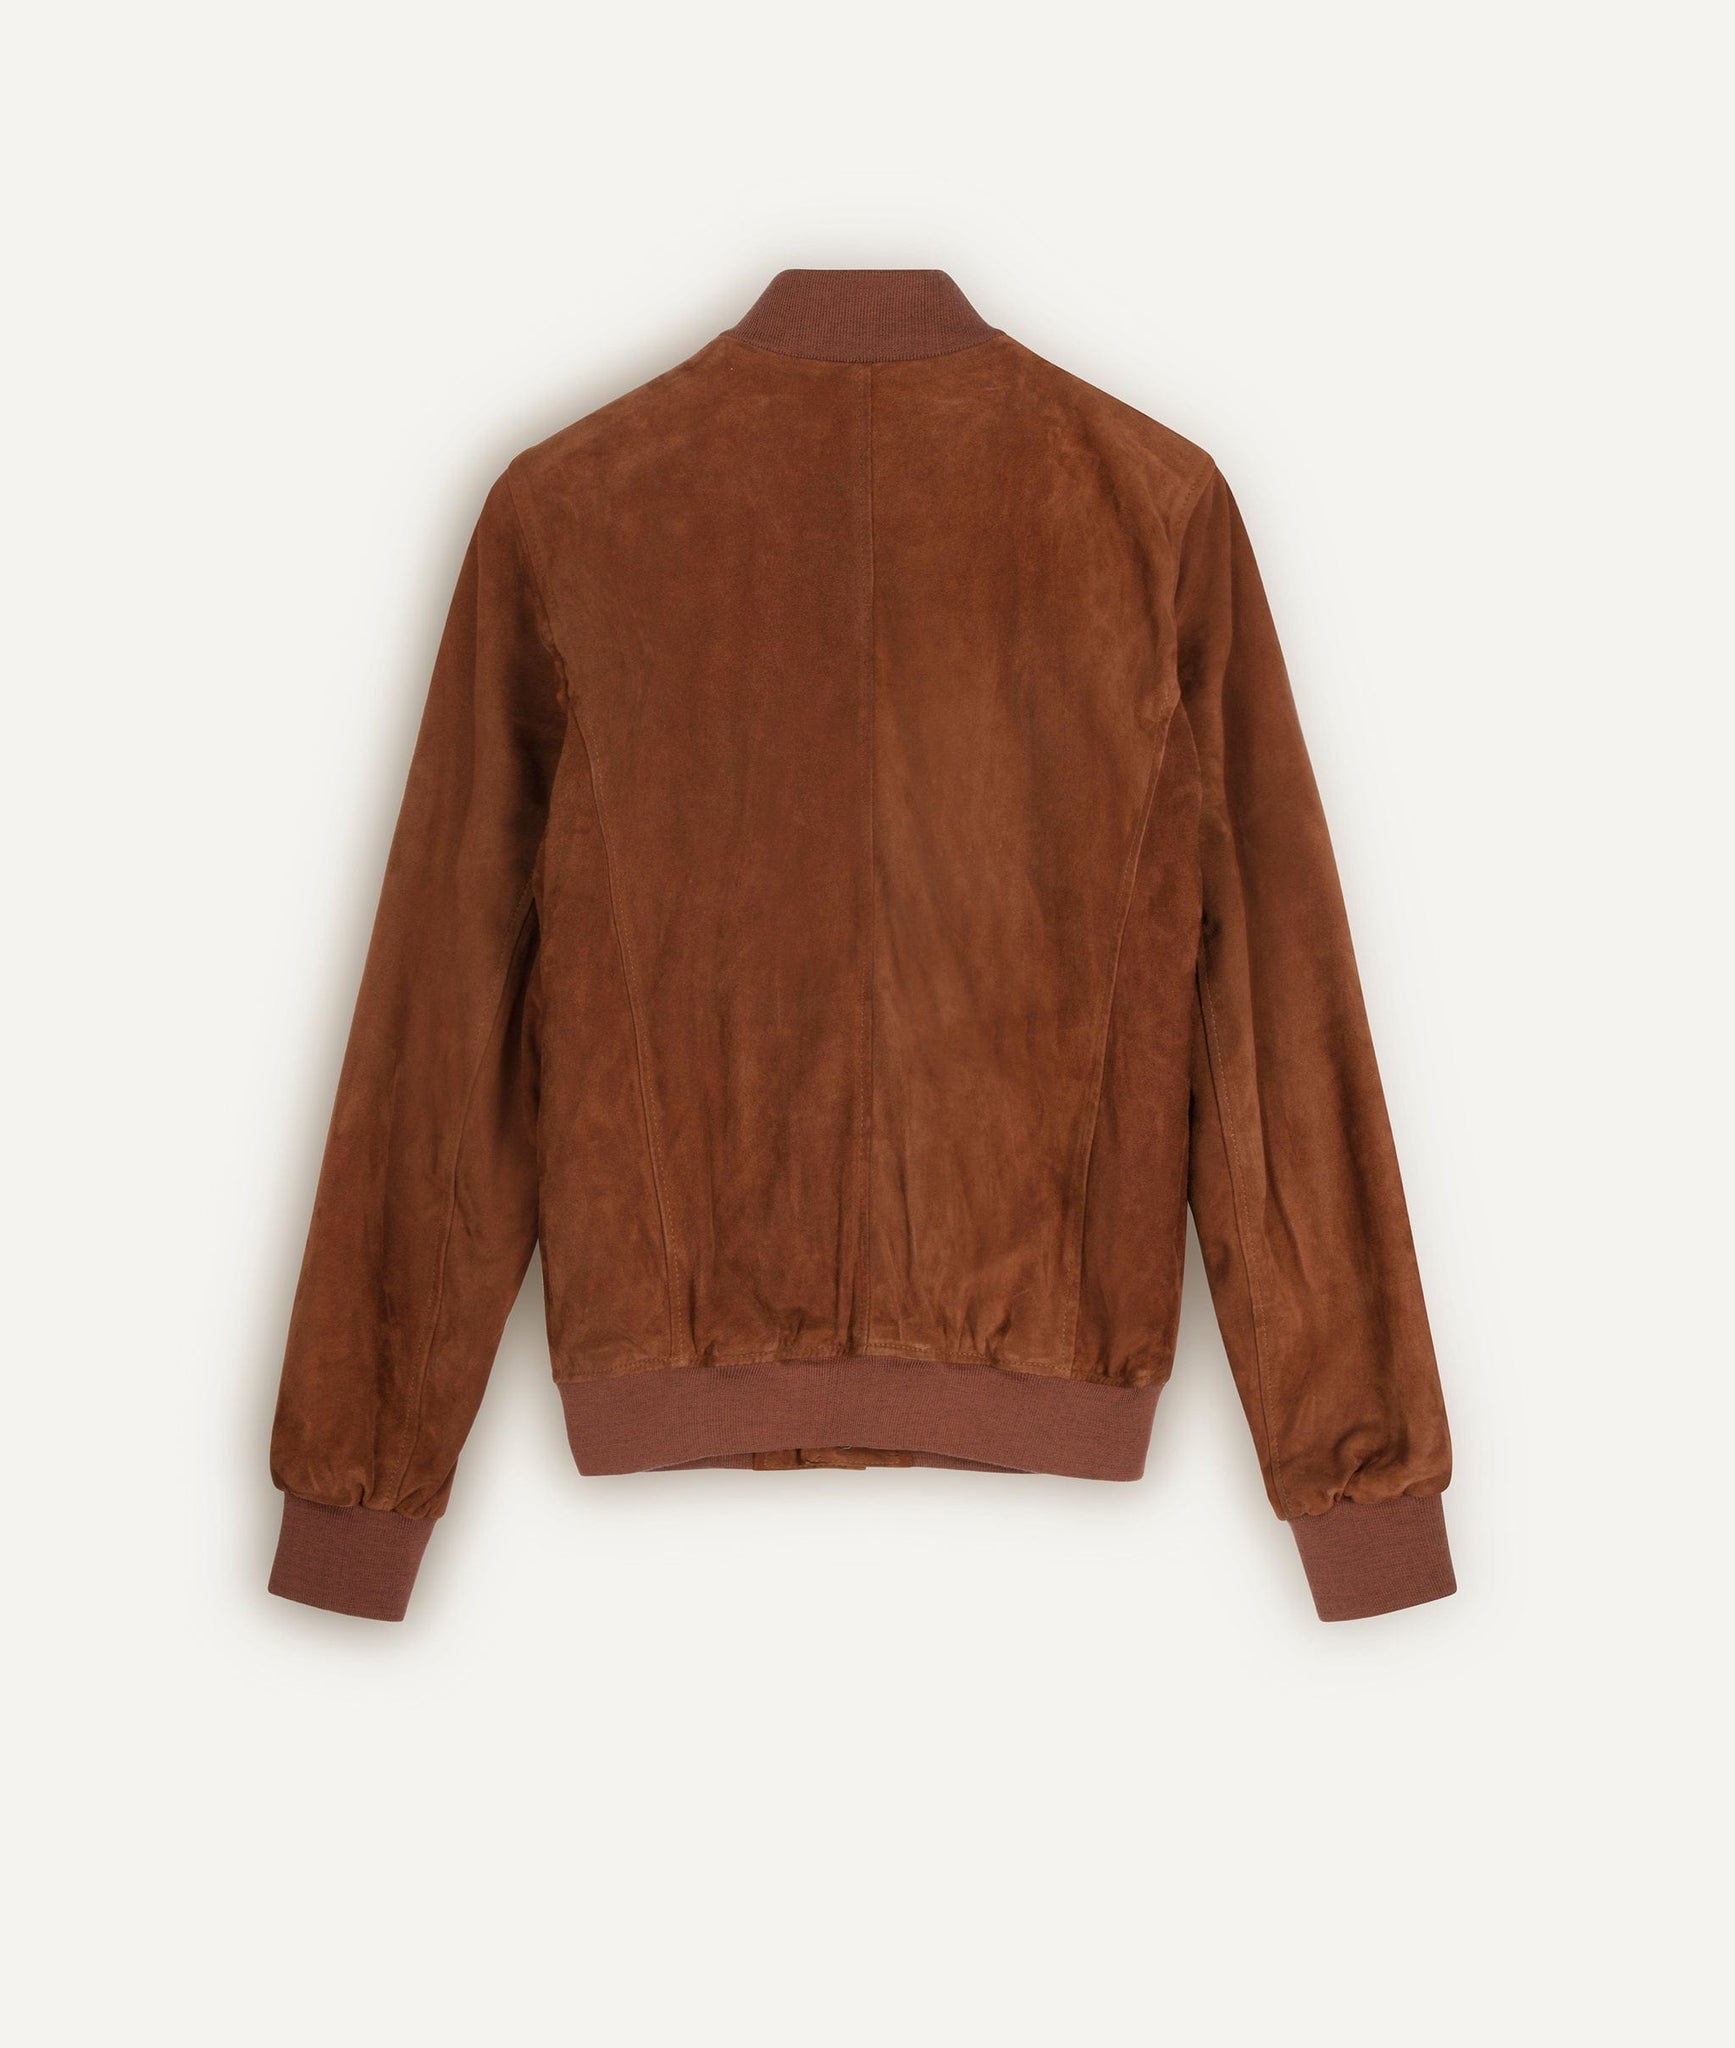 A1 Bomber Jacket in Suede